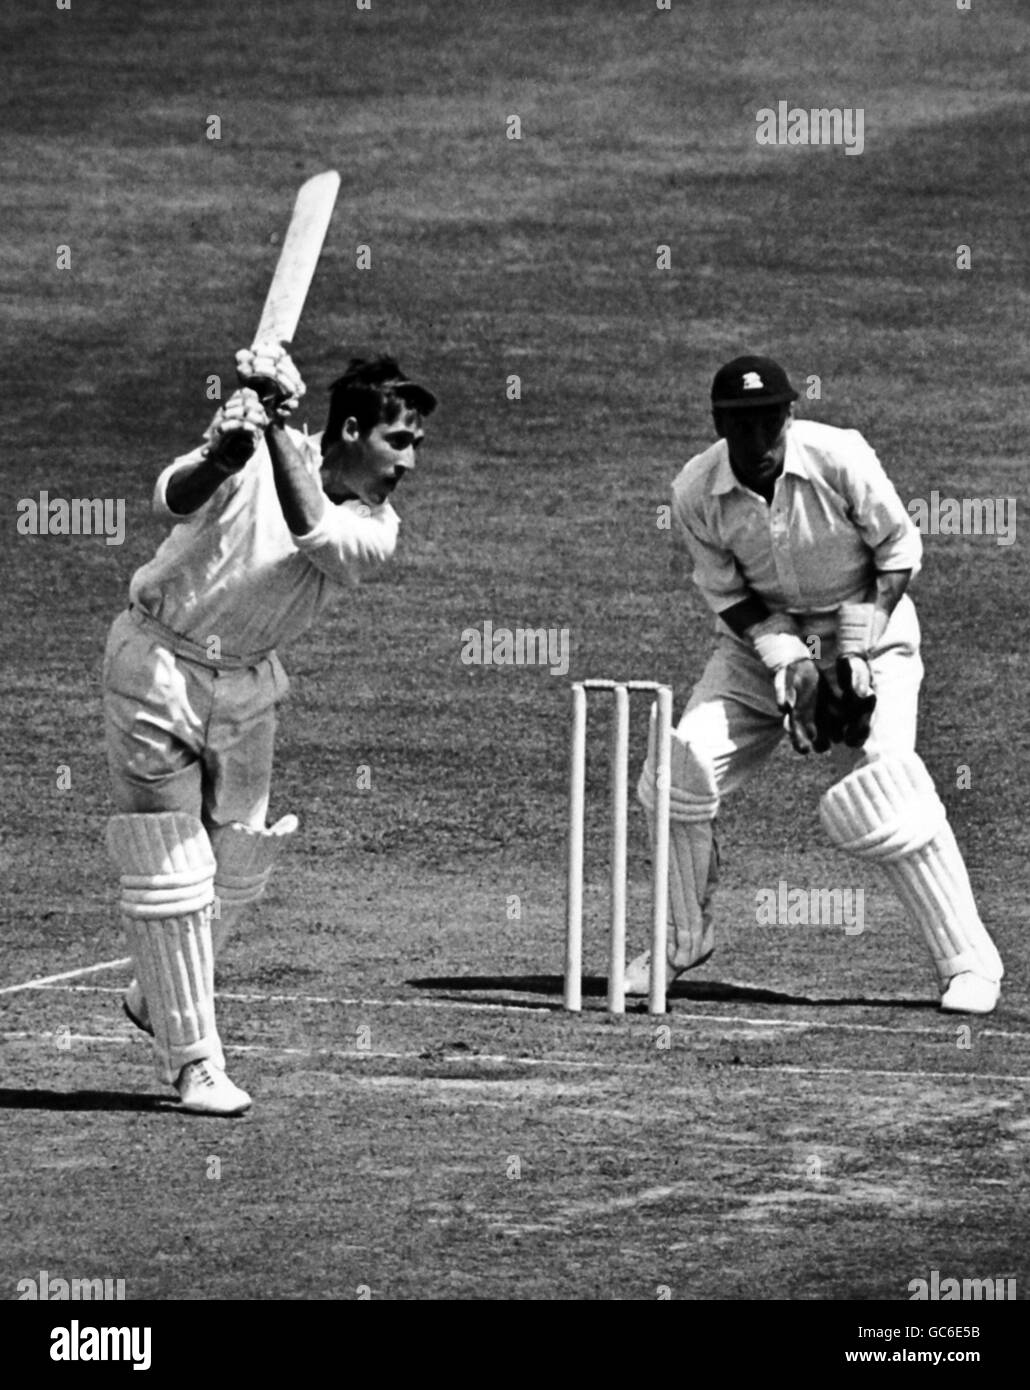 Cricket.Peter Parfitt coupe Gary Sobers. Banque D'Images